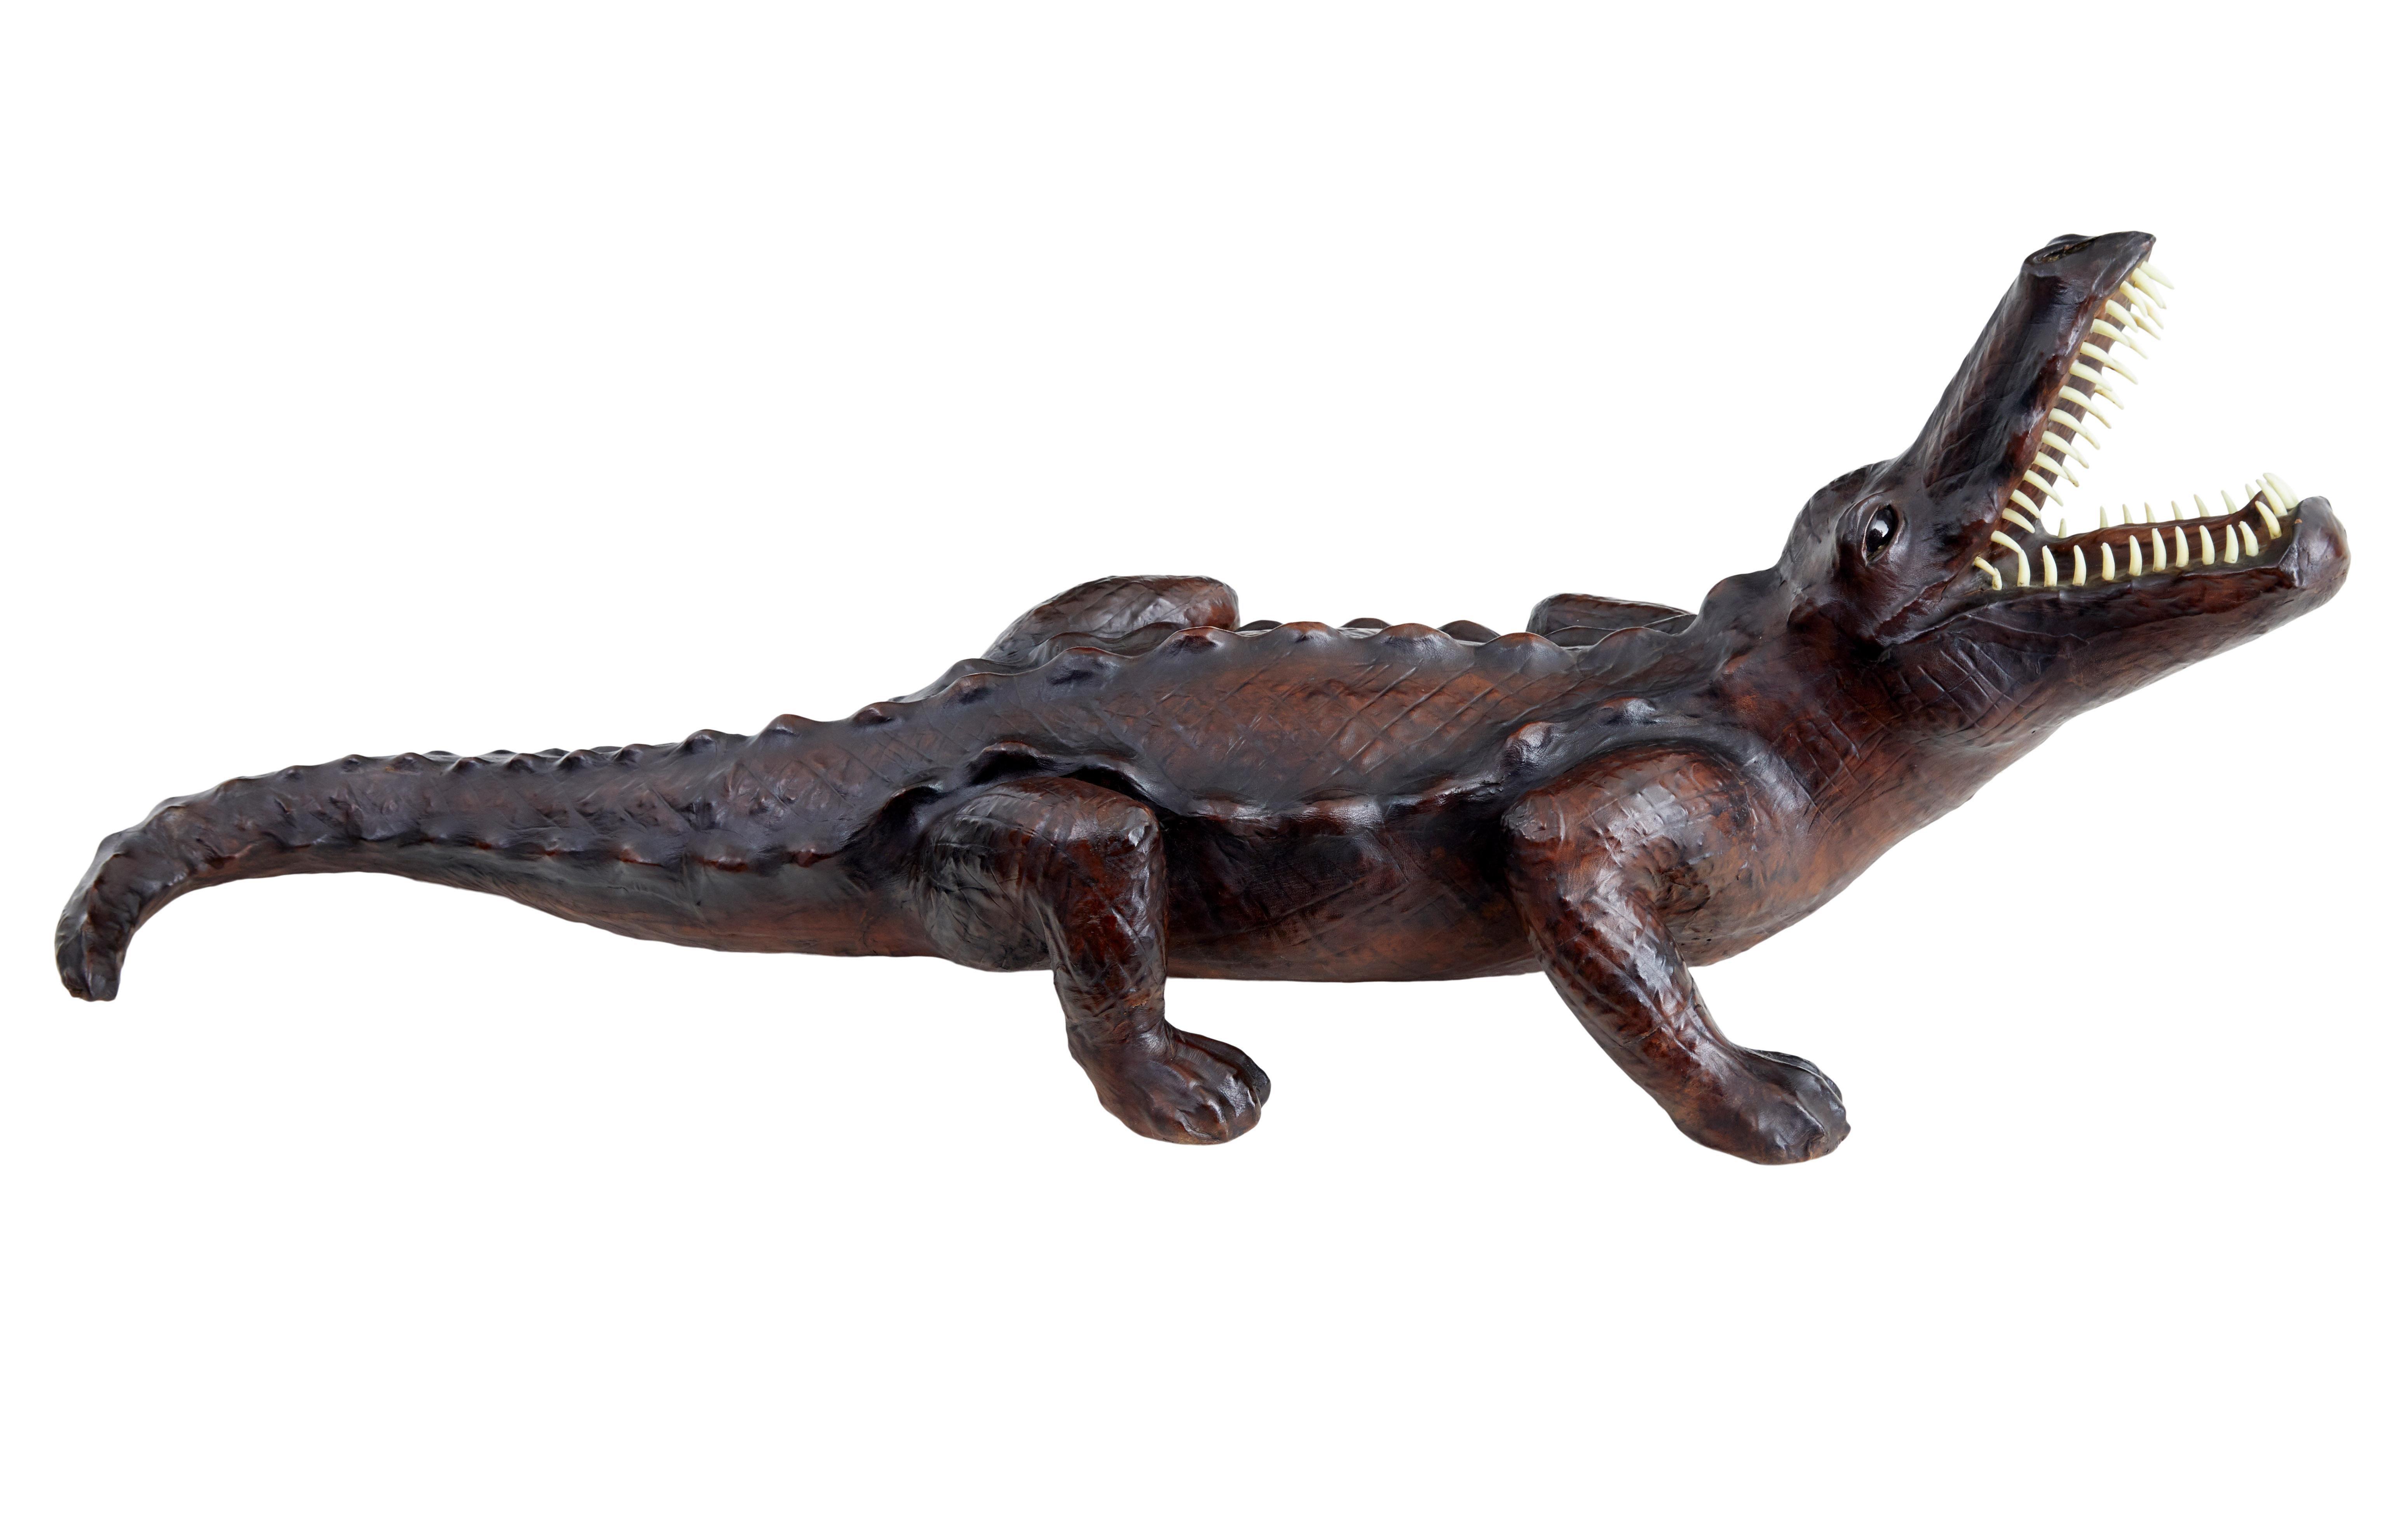 20th century decorative leather model of a crocodile circa 1990.

Approximately half scale novelty item, depicting a crocodile with it's head raised in an aggressive stance.  Clad in a faux leather which has produced a good patina.

Mouth fitted